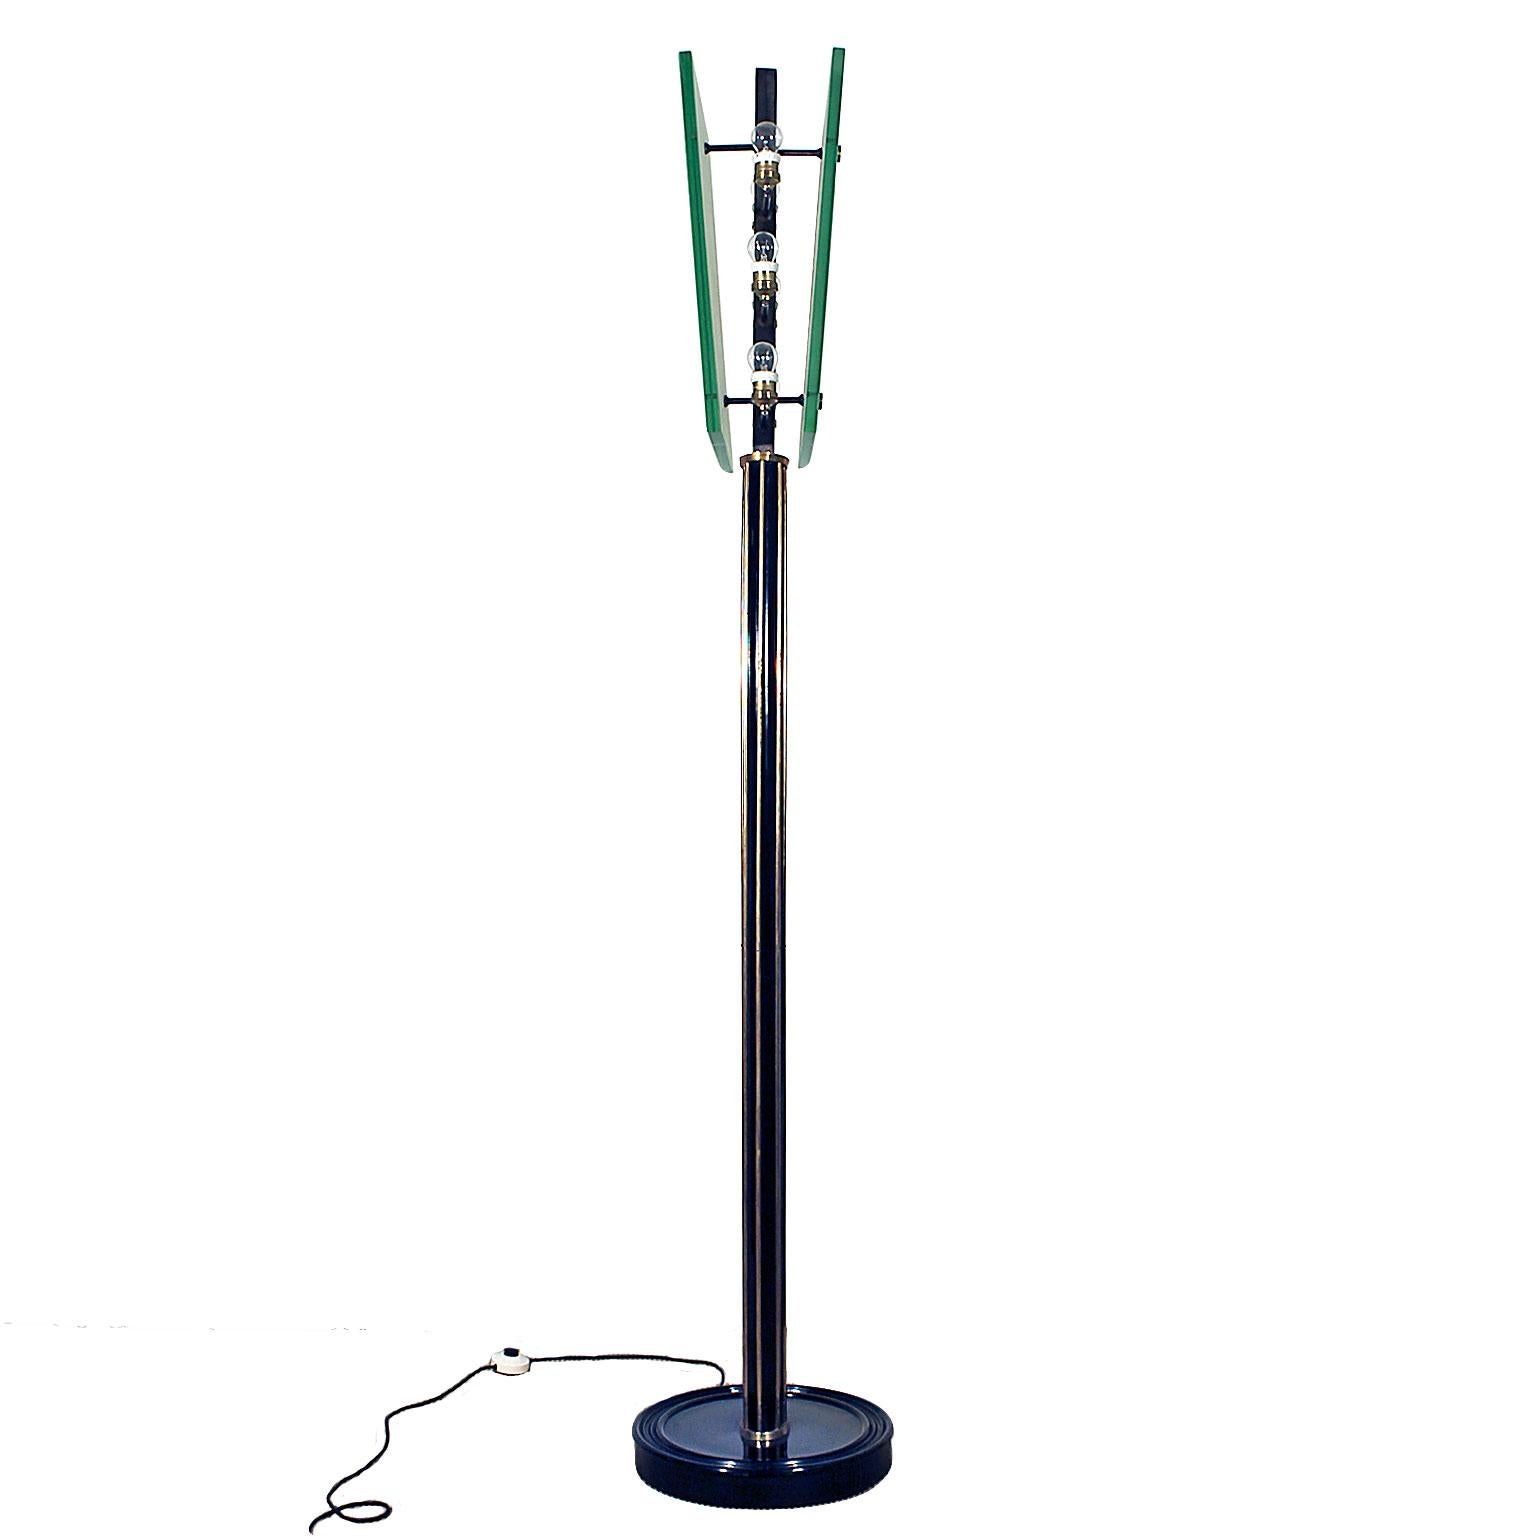 Italian 1930s Art Deco Standing Lamp, Thick Glasses, Style of Fontana Arte - Italy For Sale